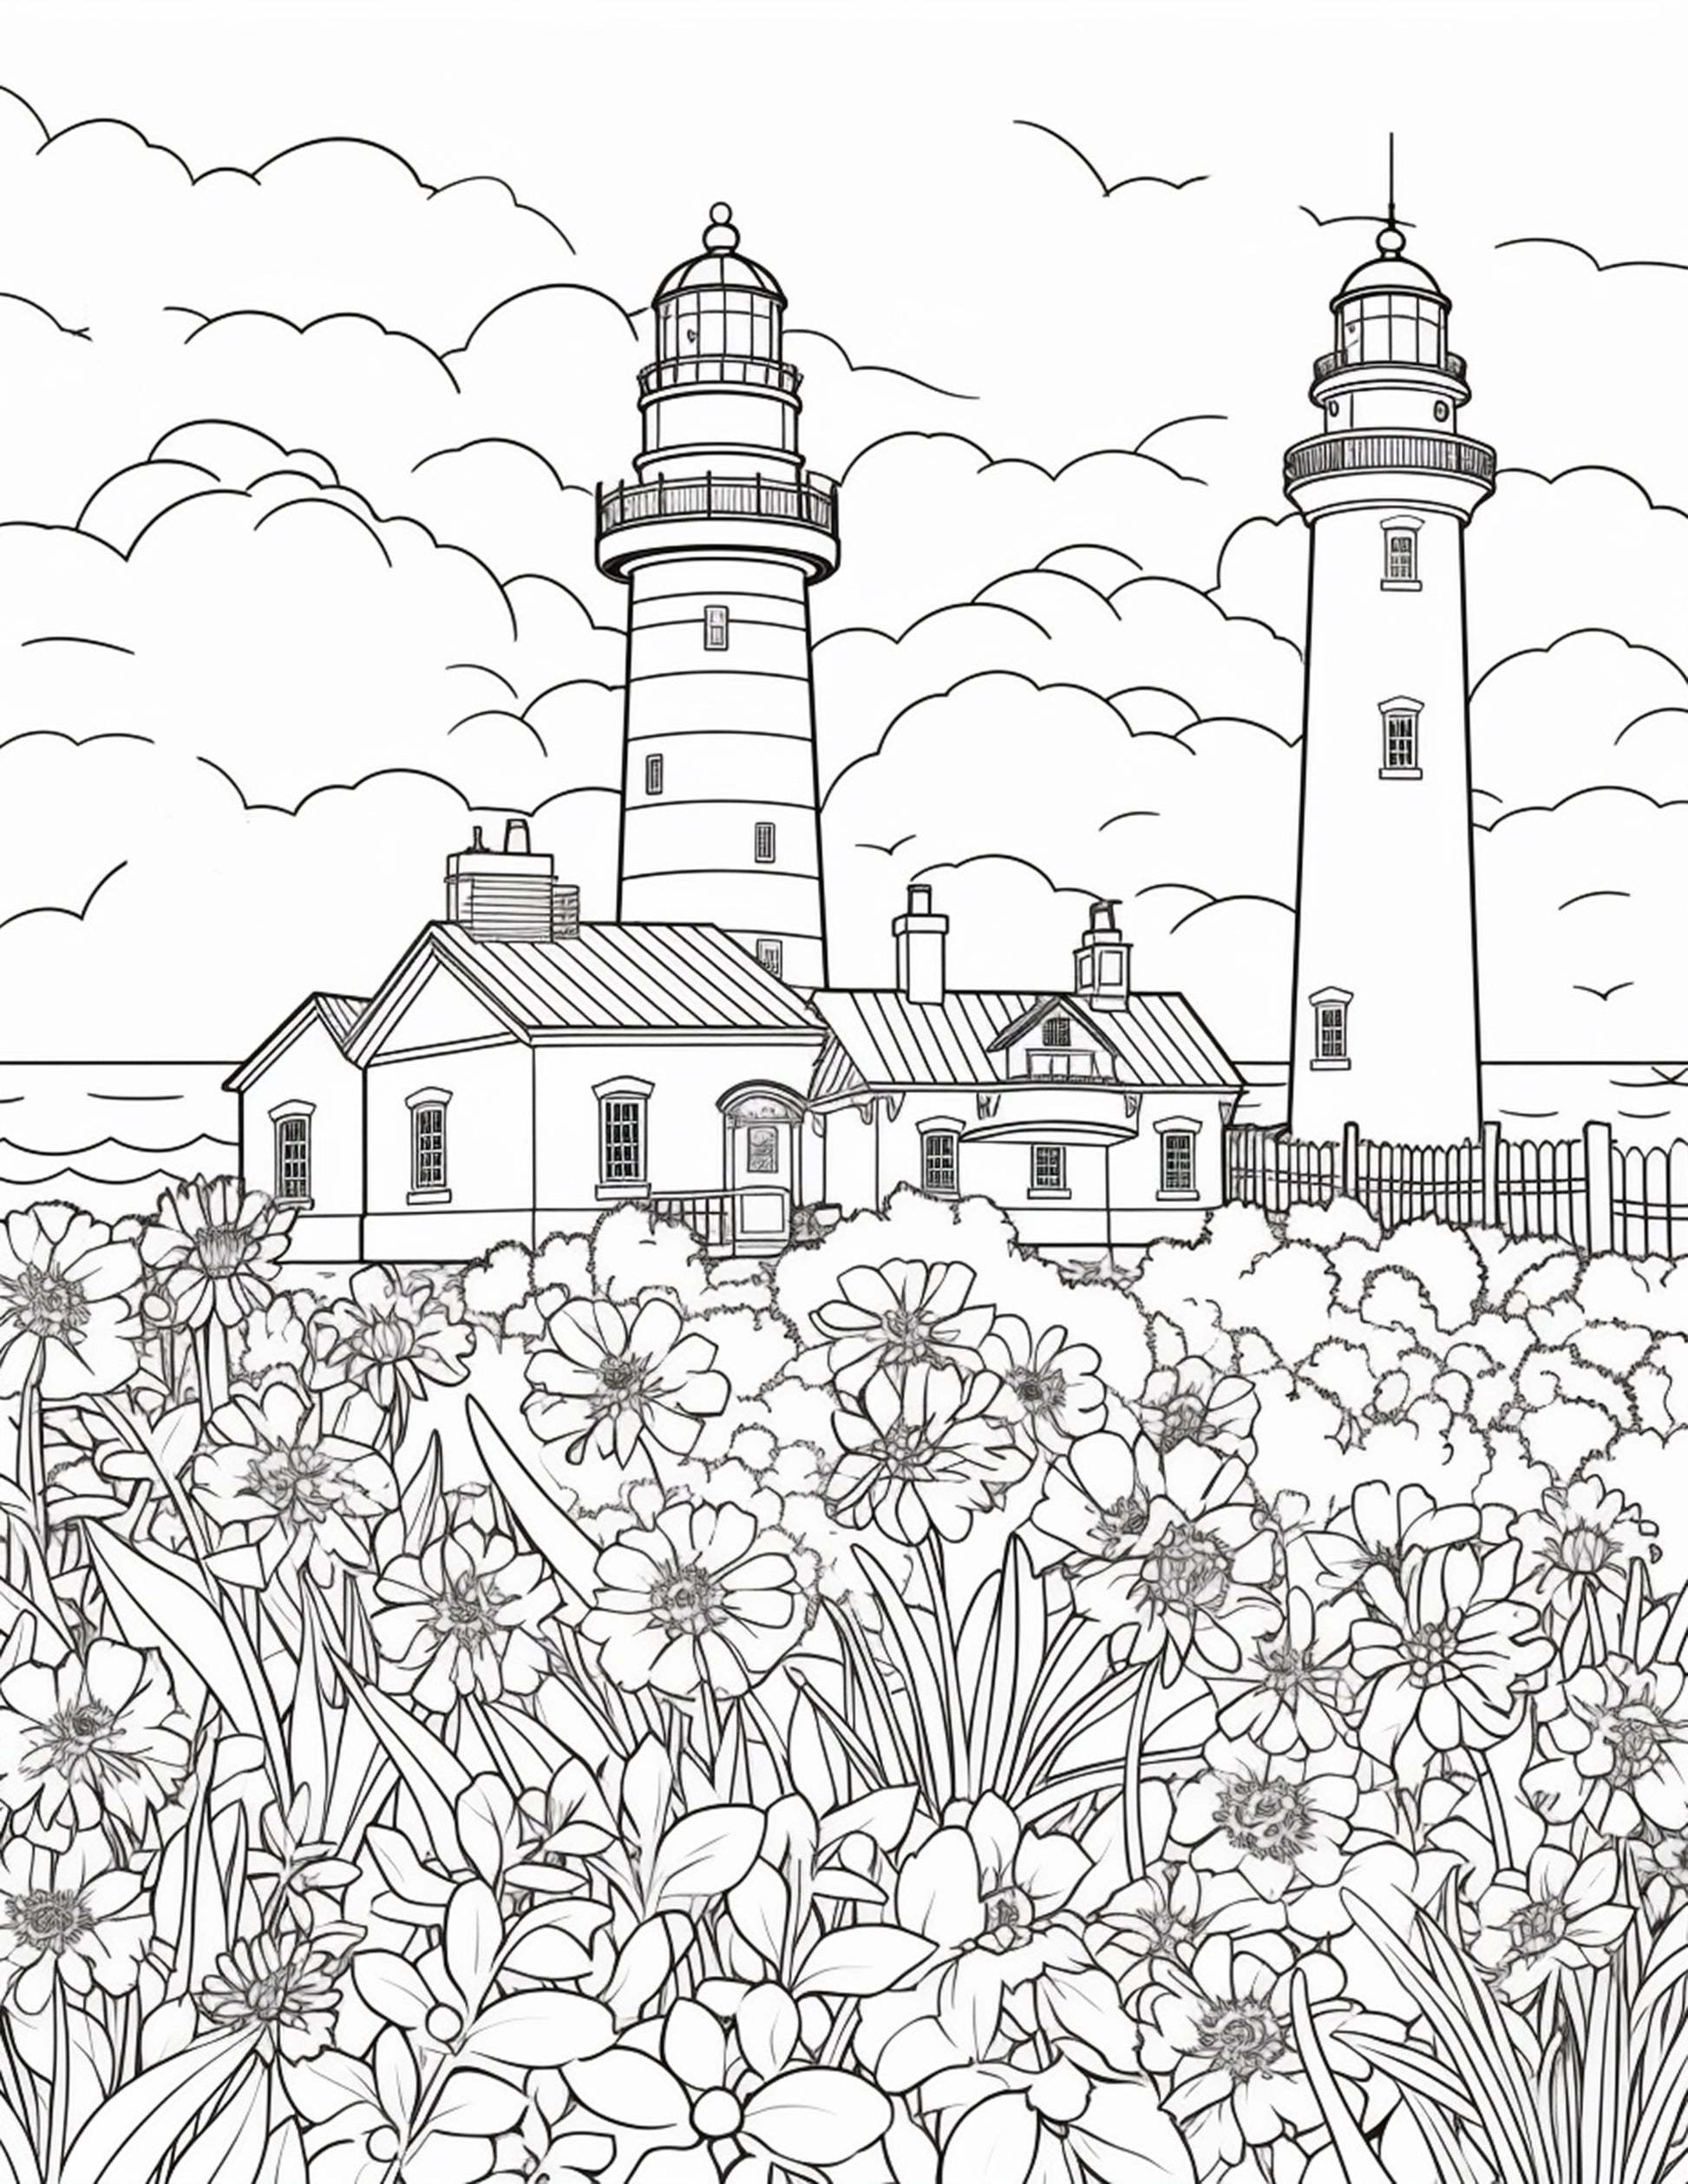 Printable lighthouse scene coloring pages for adults printable pd â coloring